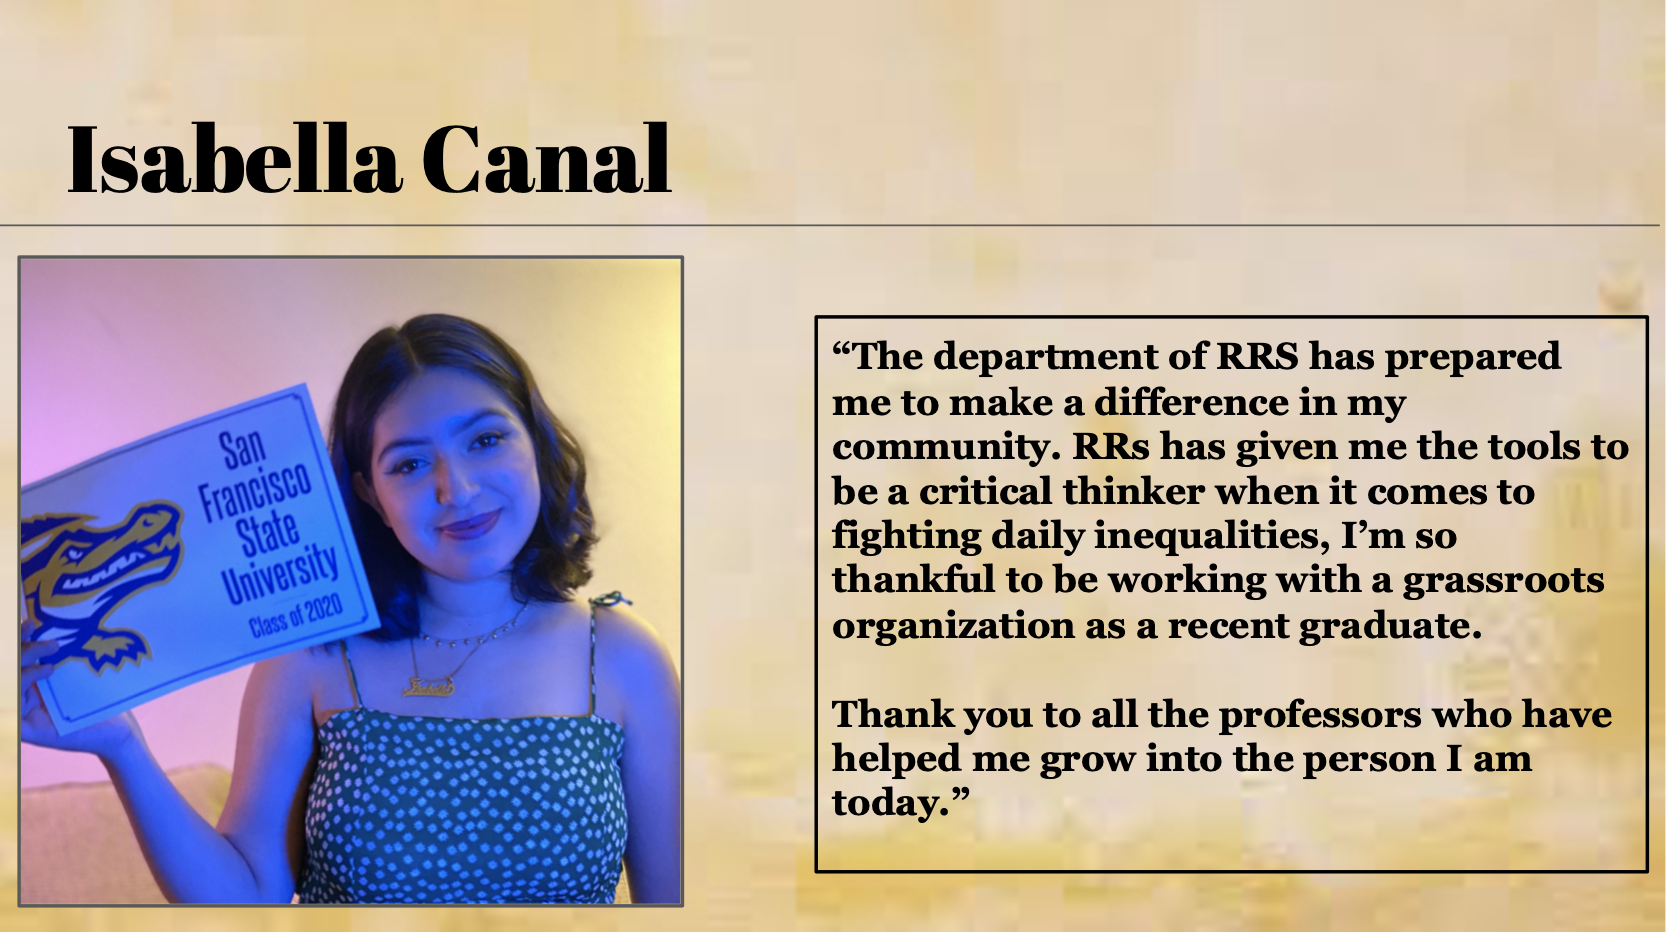  The department of RRS has prepared Isabella Canal to make a difference in my community.